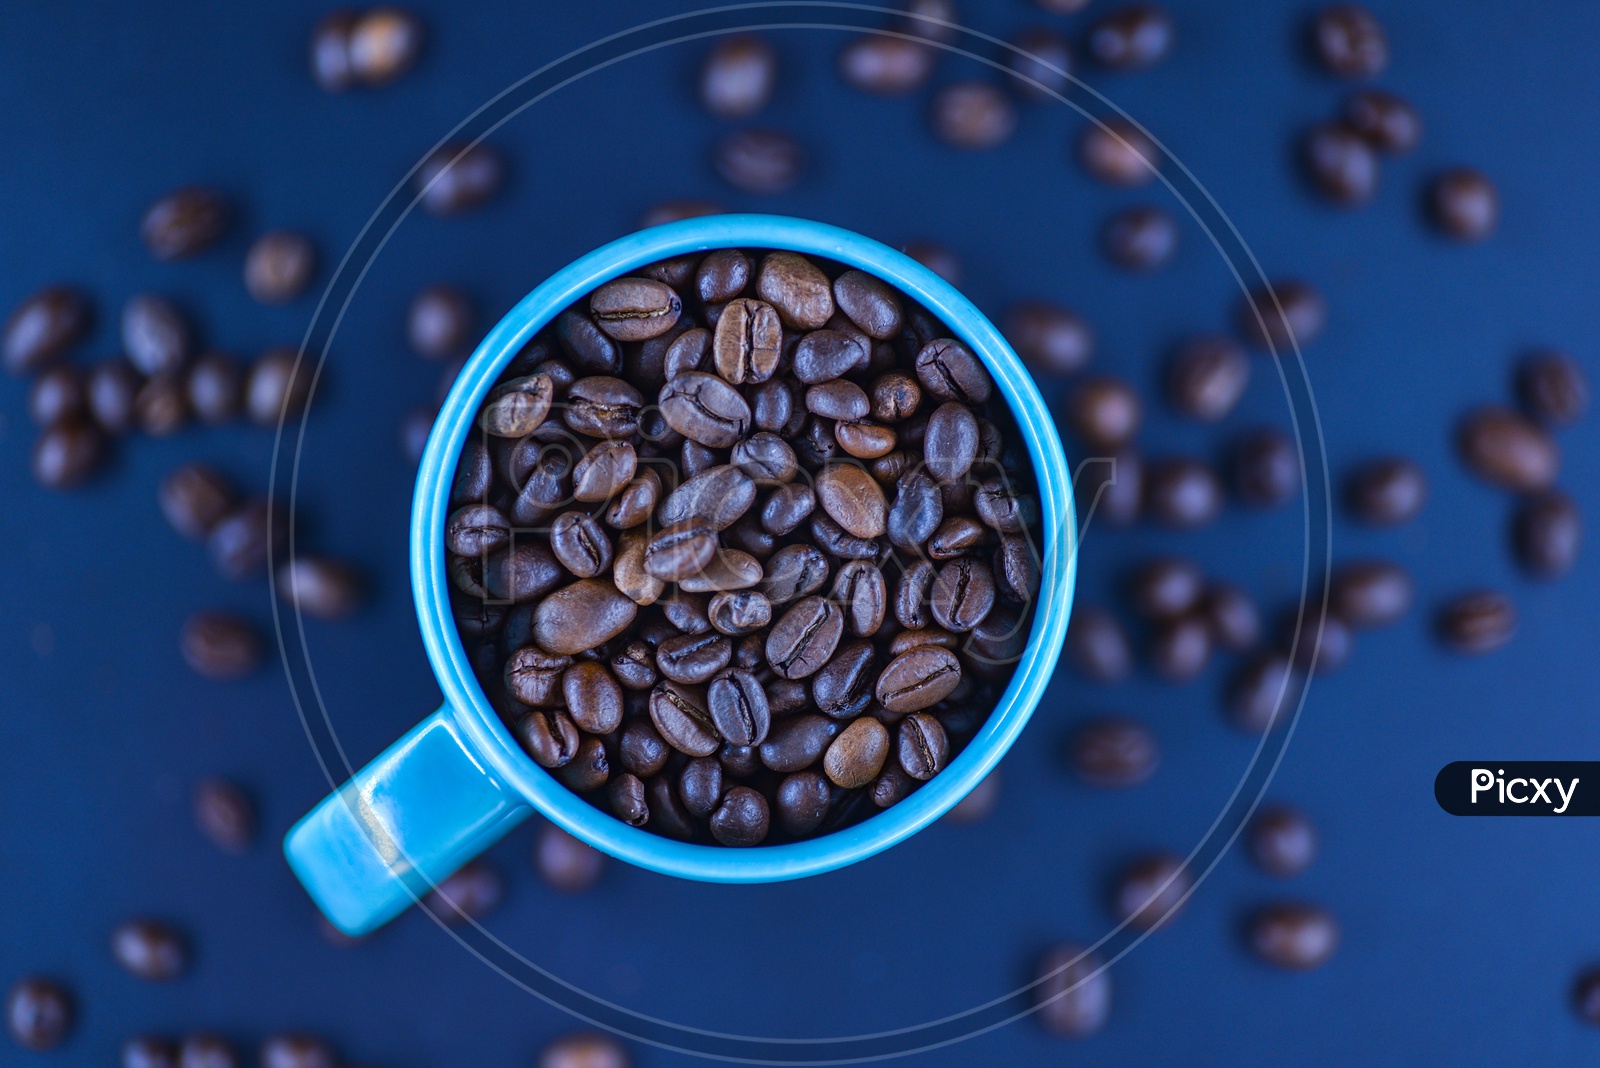 Coffee Beans In a Coffee Mug With Scattered Coffee Beans In Background